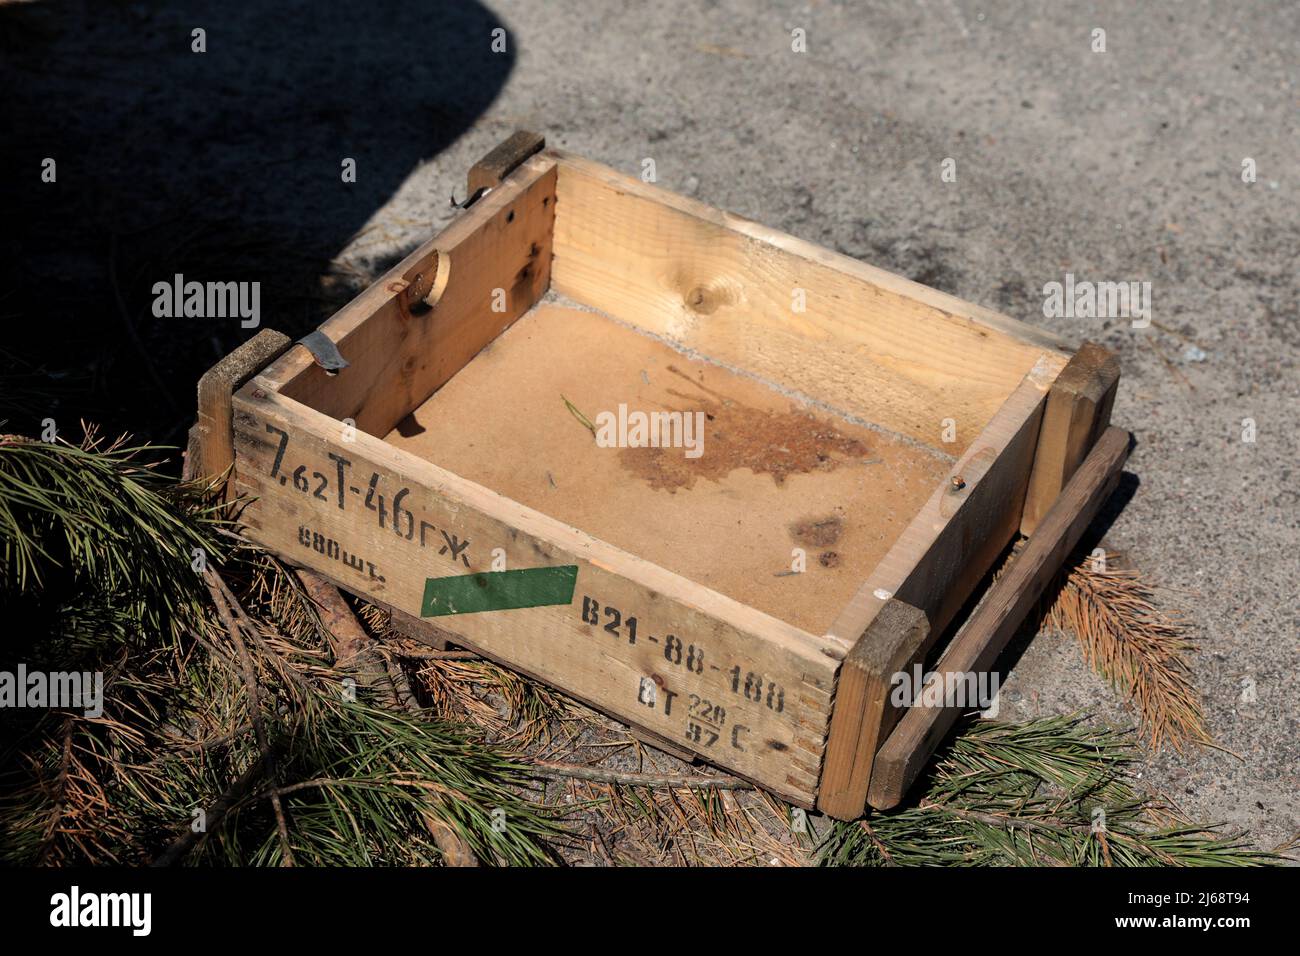 KYIV REGION, UKRAINE - APRIL 28, 2022 - A Russian ammunition box is pictured in the Chornobyl Exclusion Zone after the withdrawal of Russian troops, K Stock Photo